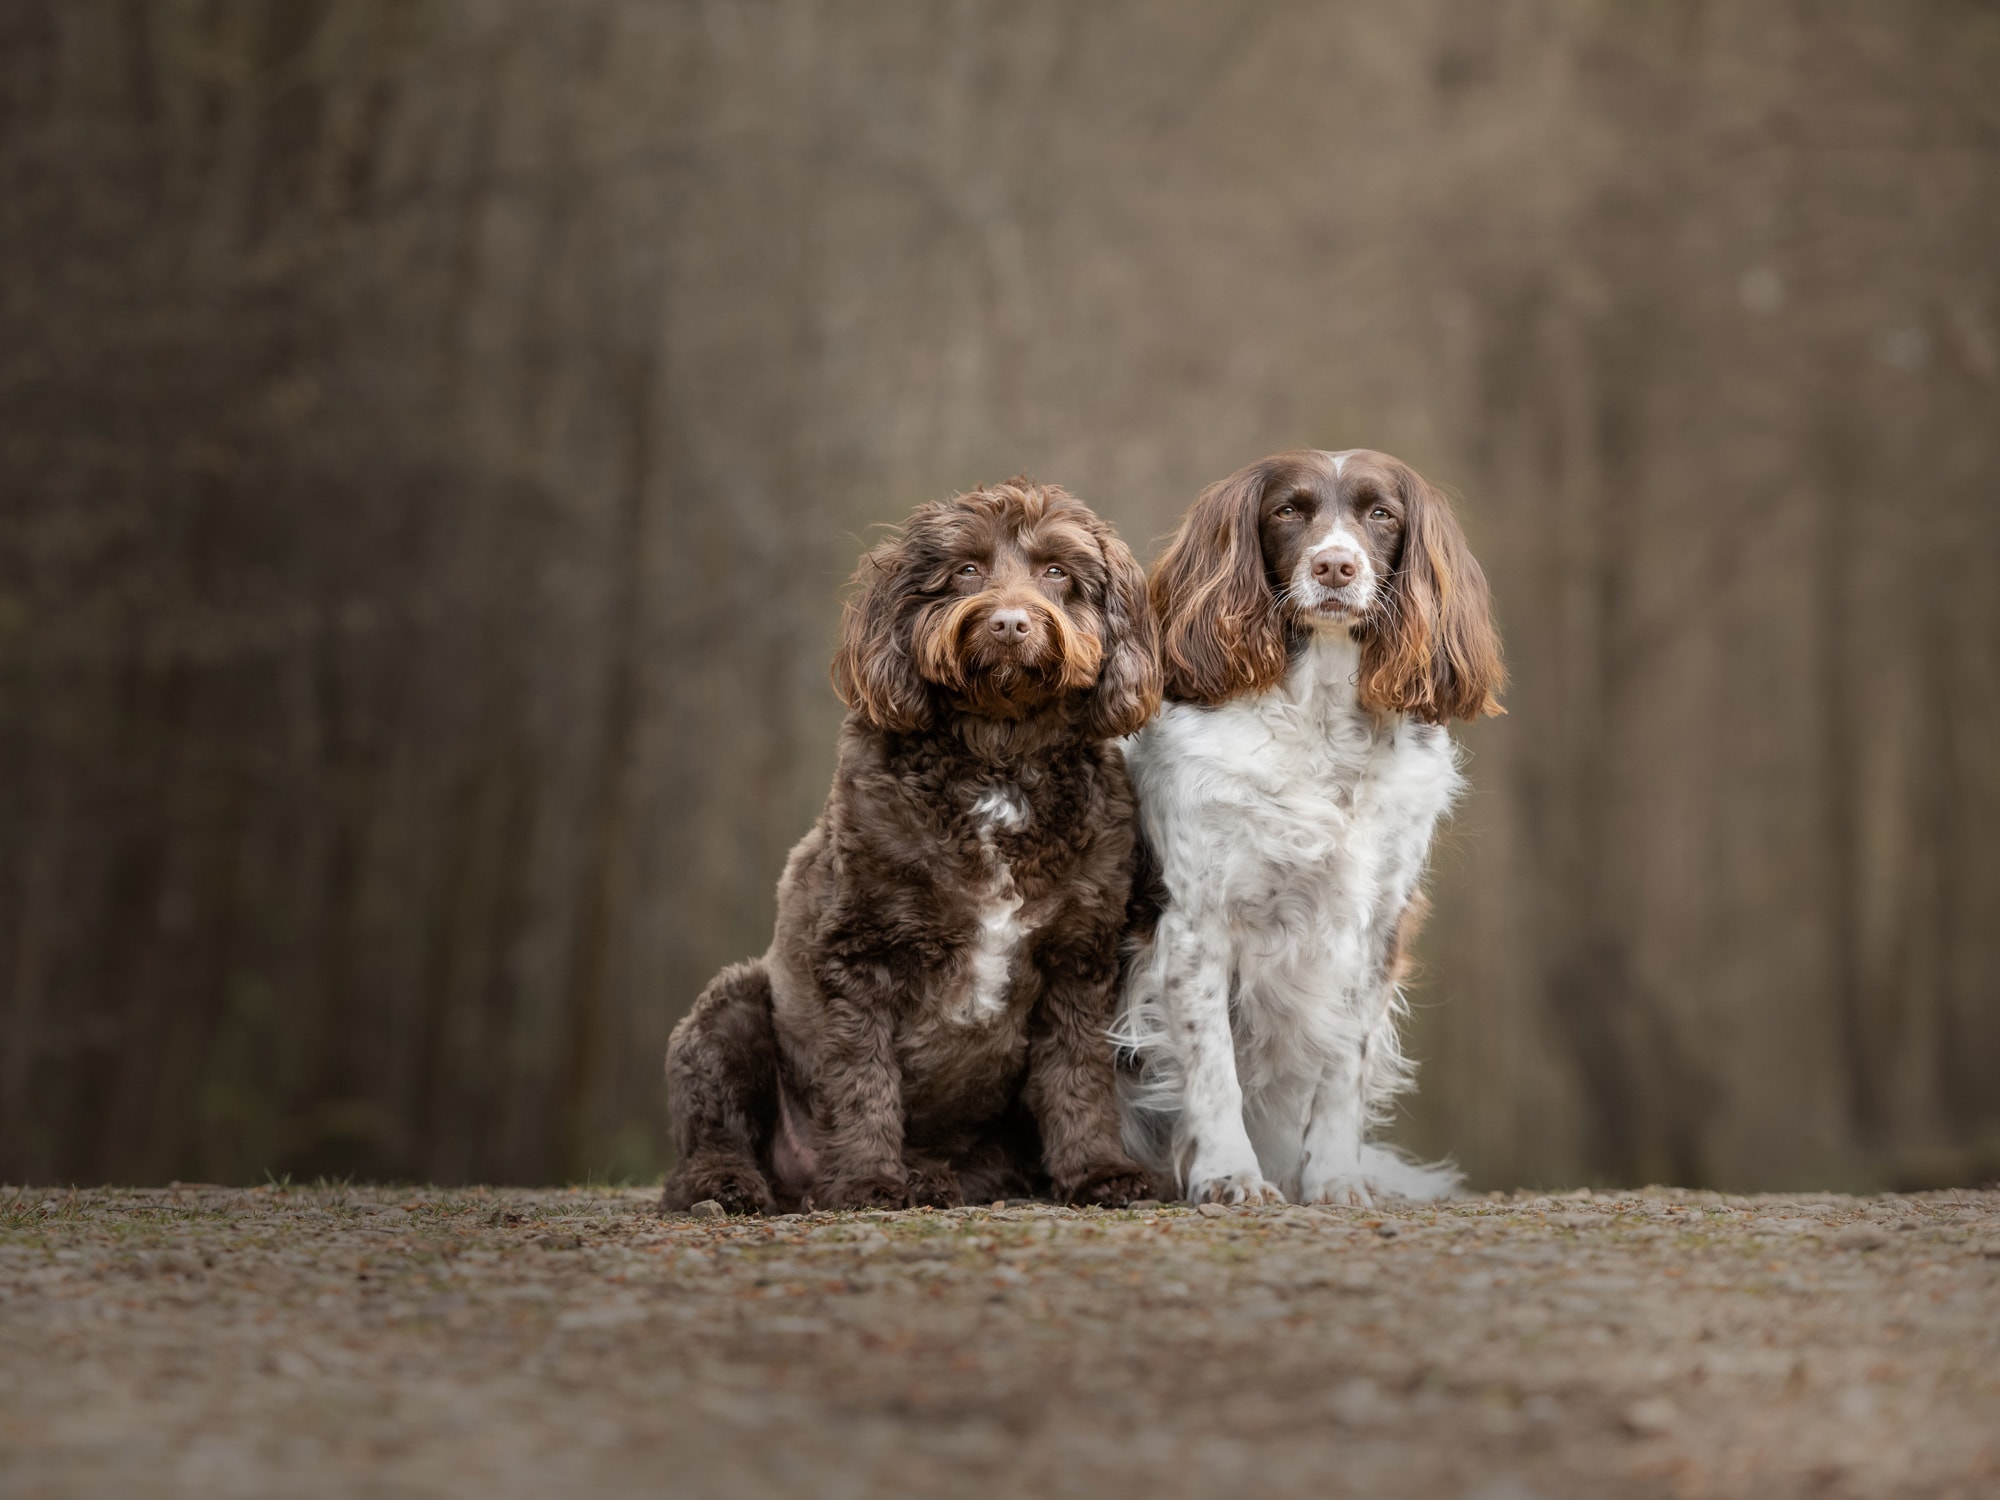 Nic Bisseker photography dog photoshoot east grinstead